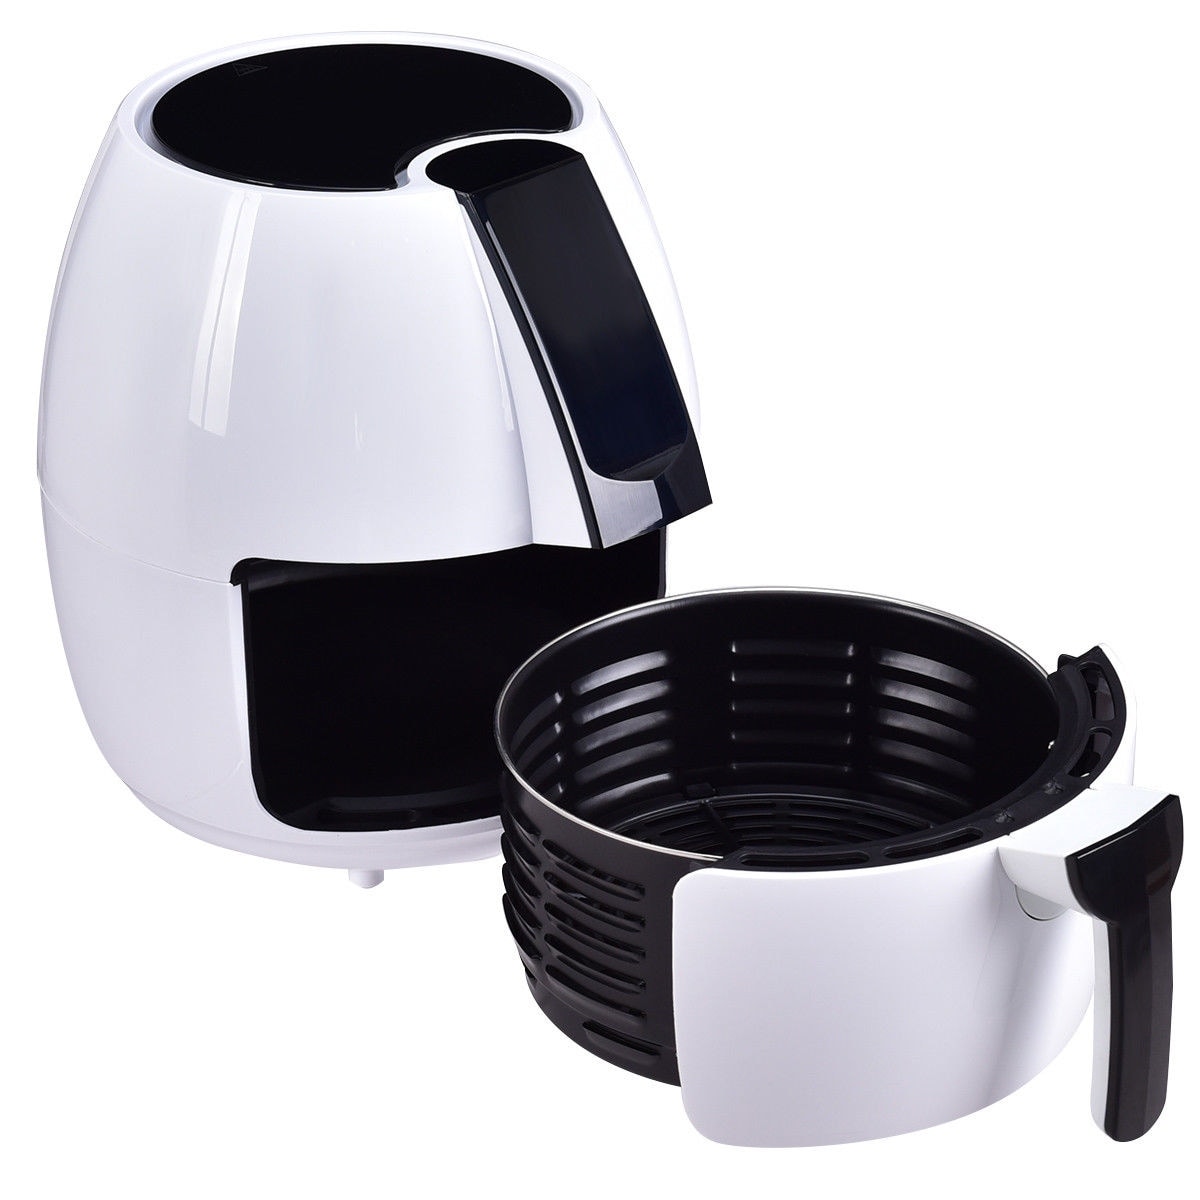 Costway 1500W Electric Air Fryer 4.8 Quart Touch LCD Screen Black/ White